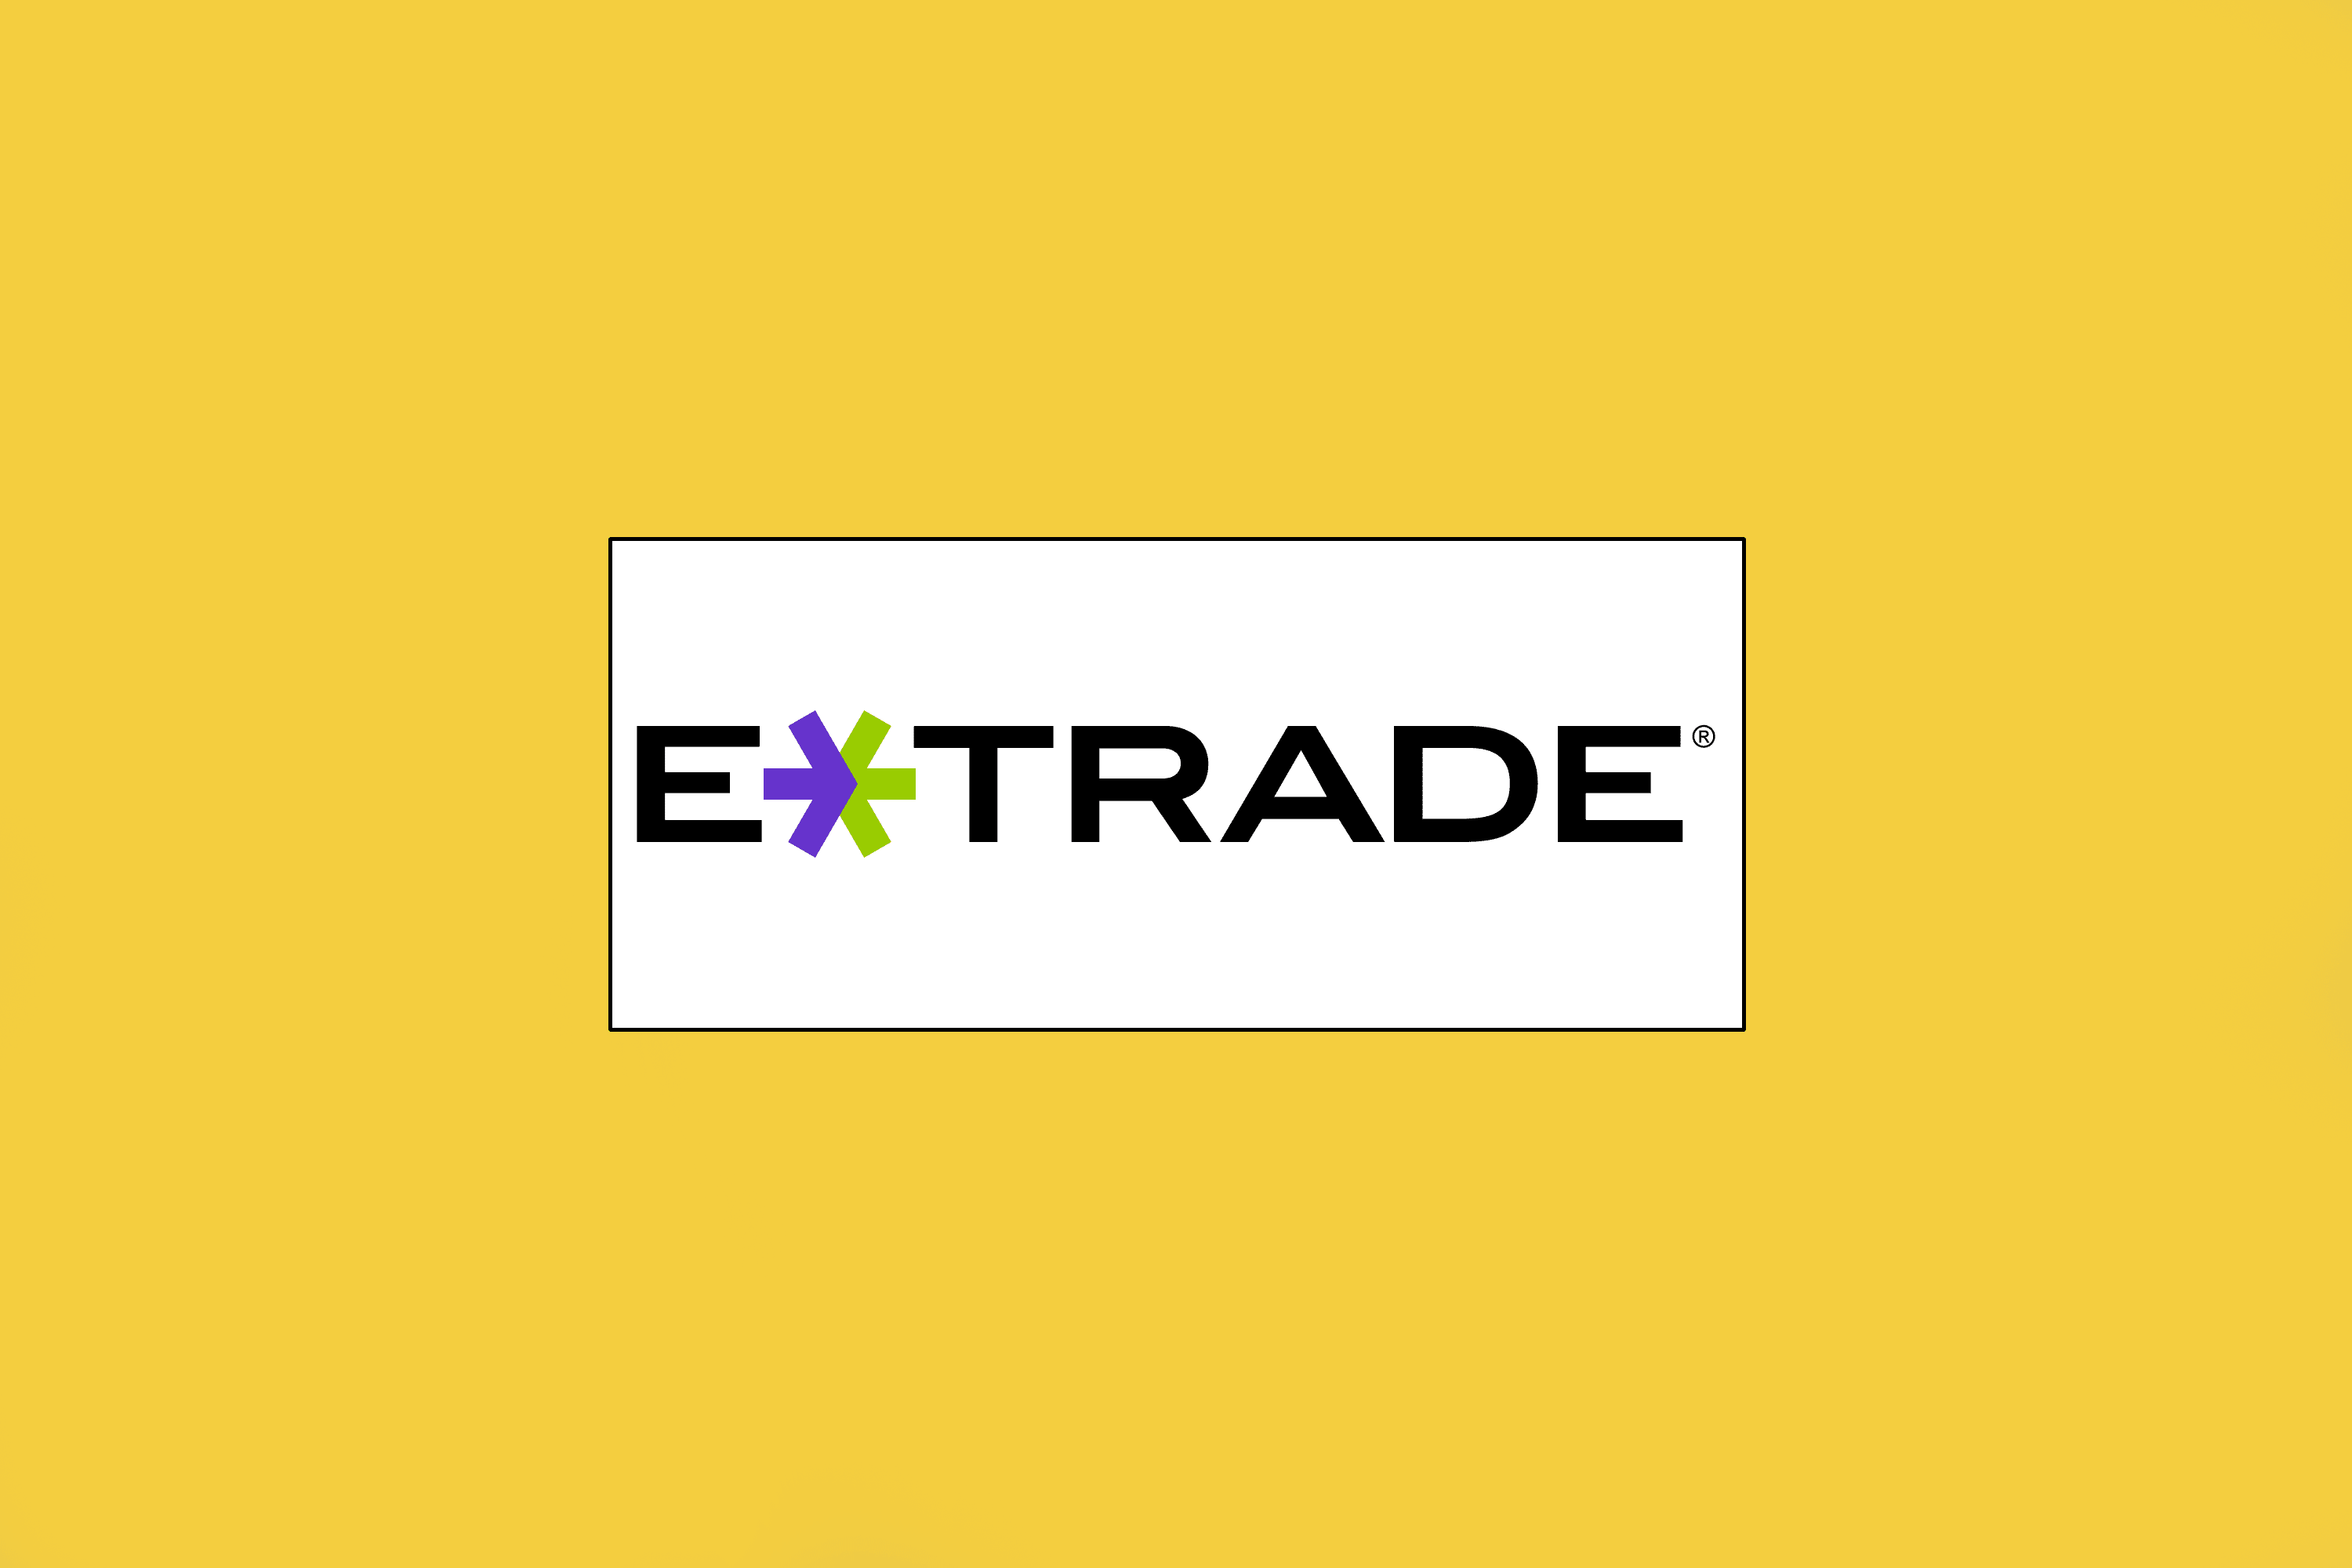 Image shows a yellow background with the E*TRADE logo in the center.